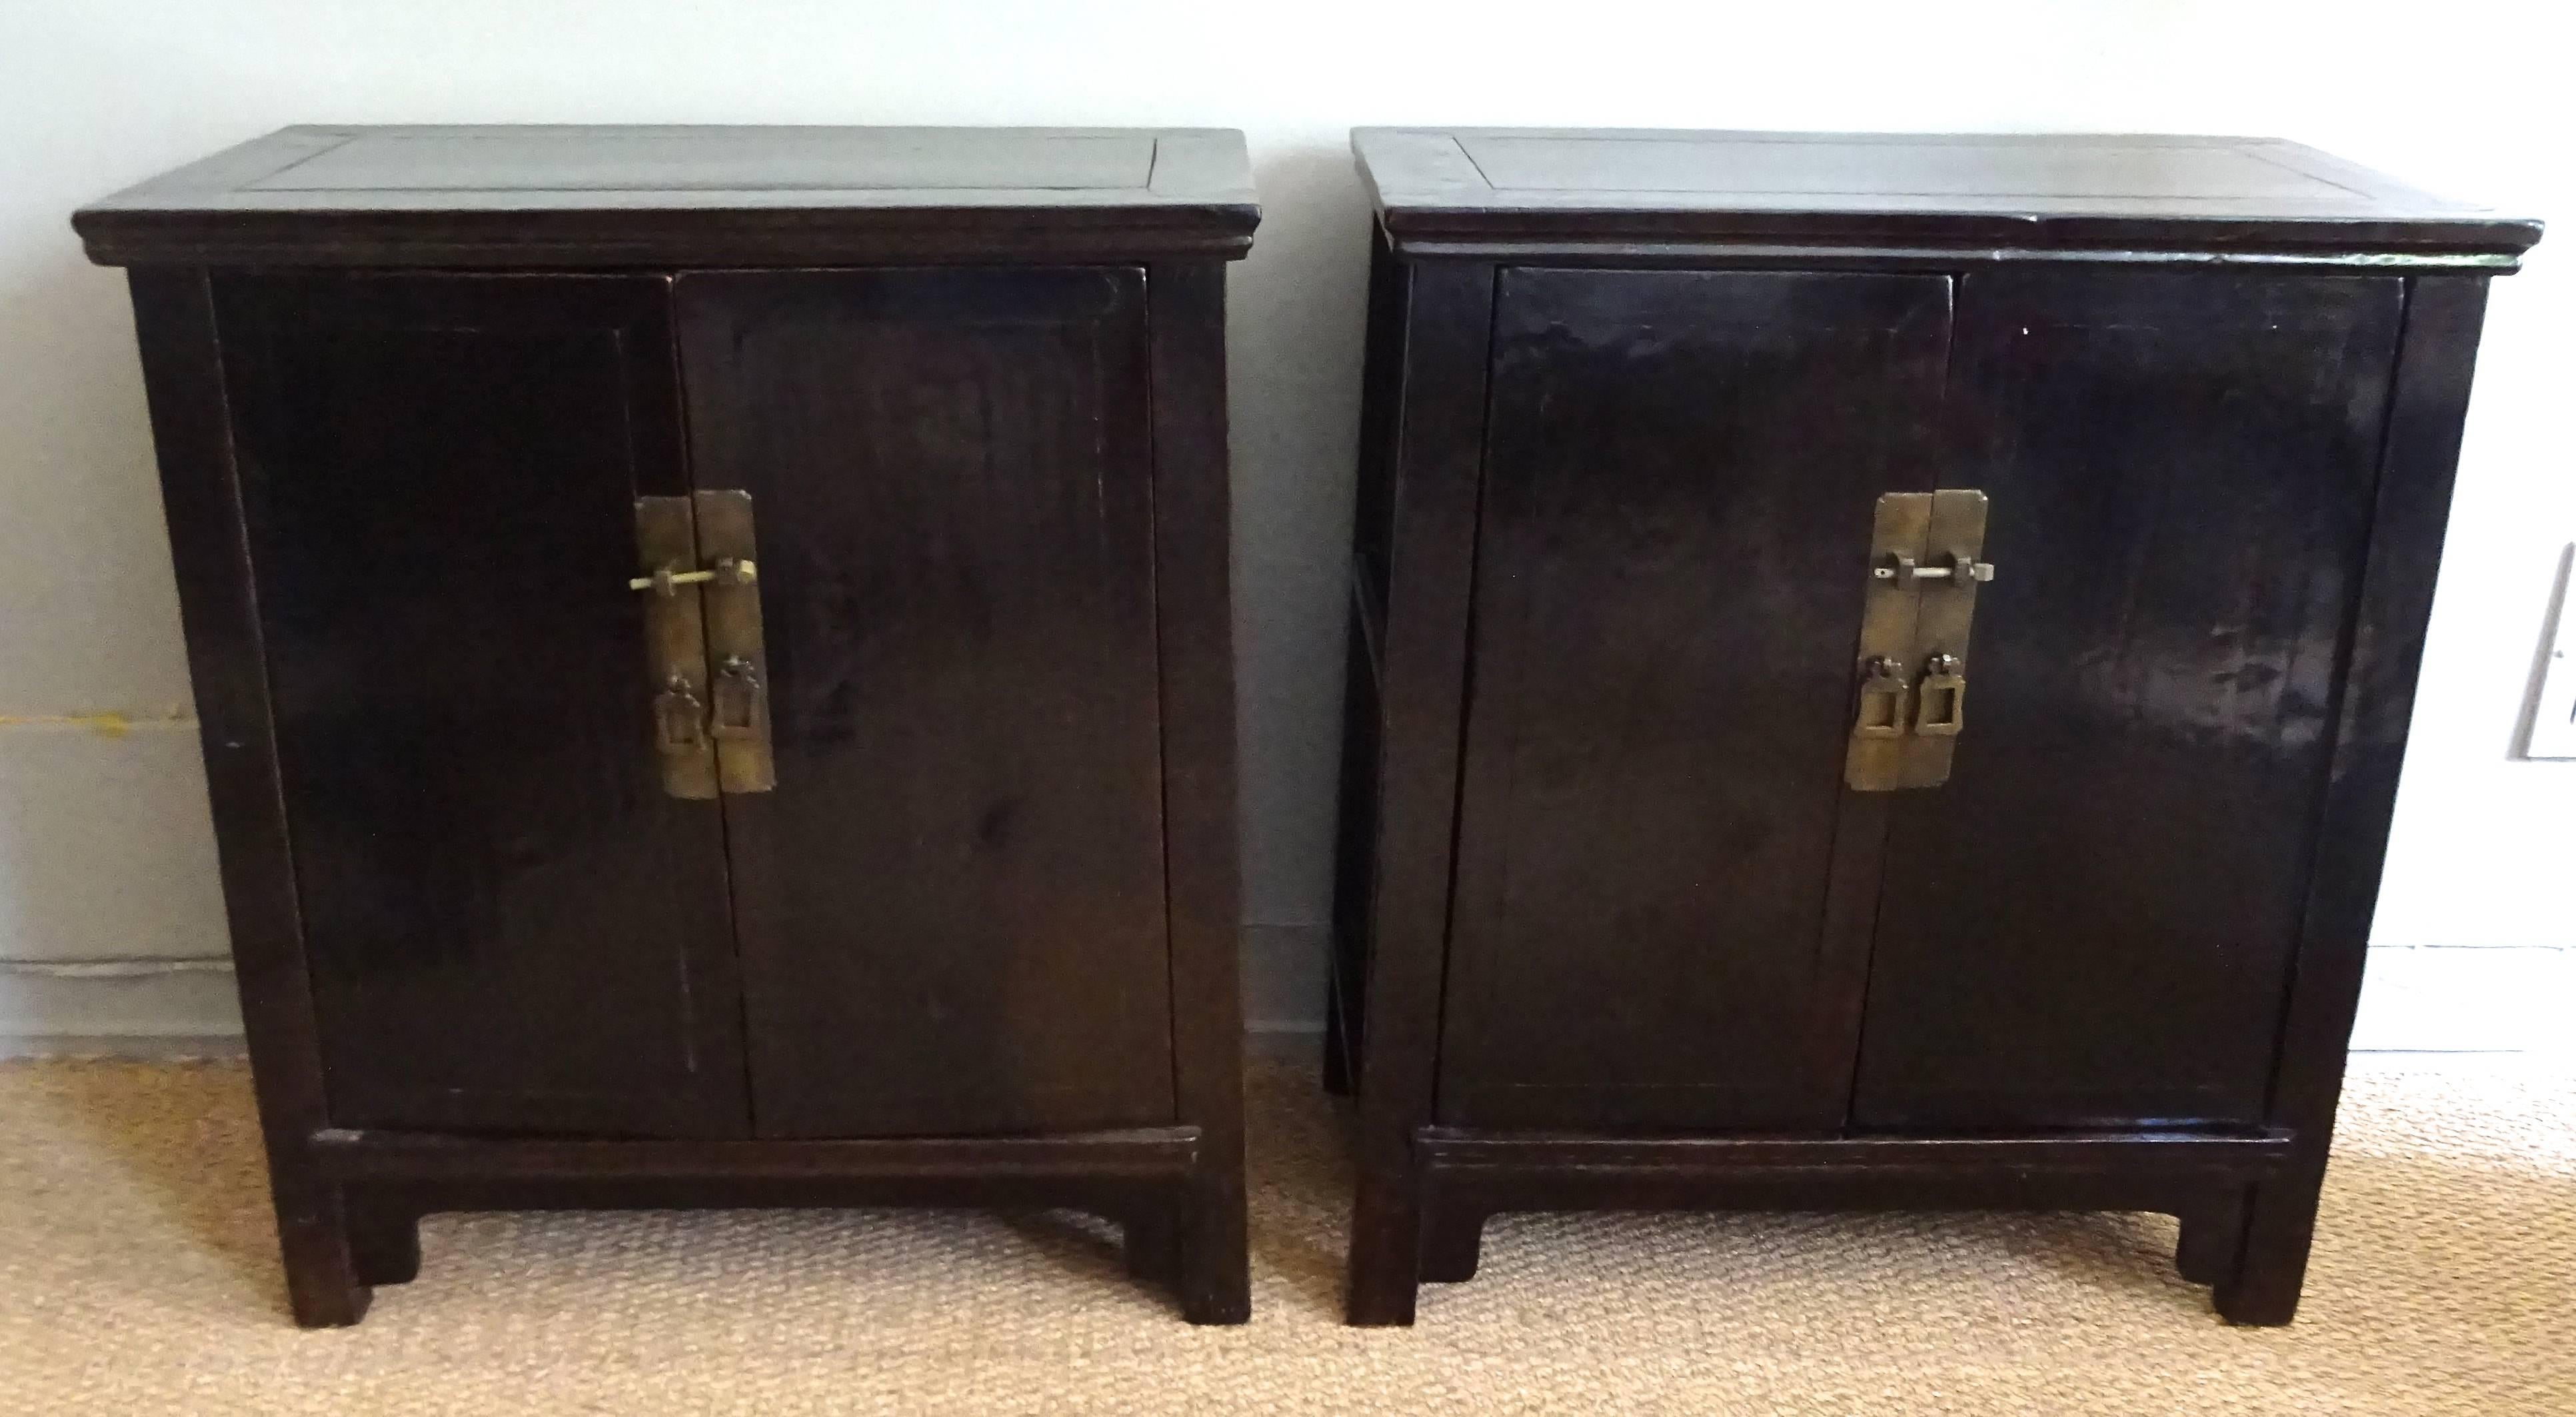 Elegant pair of low cabinets or bedside chests. Lacquered elm wood with mortise and tenon construction.